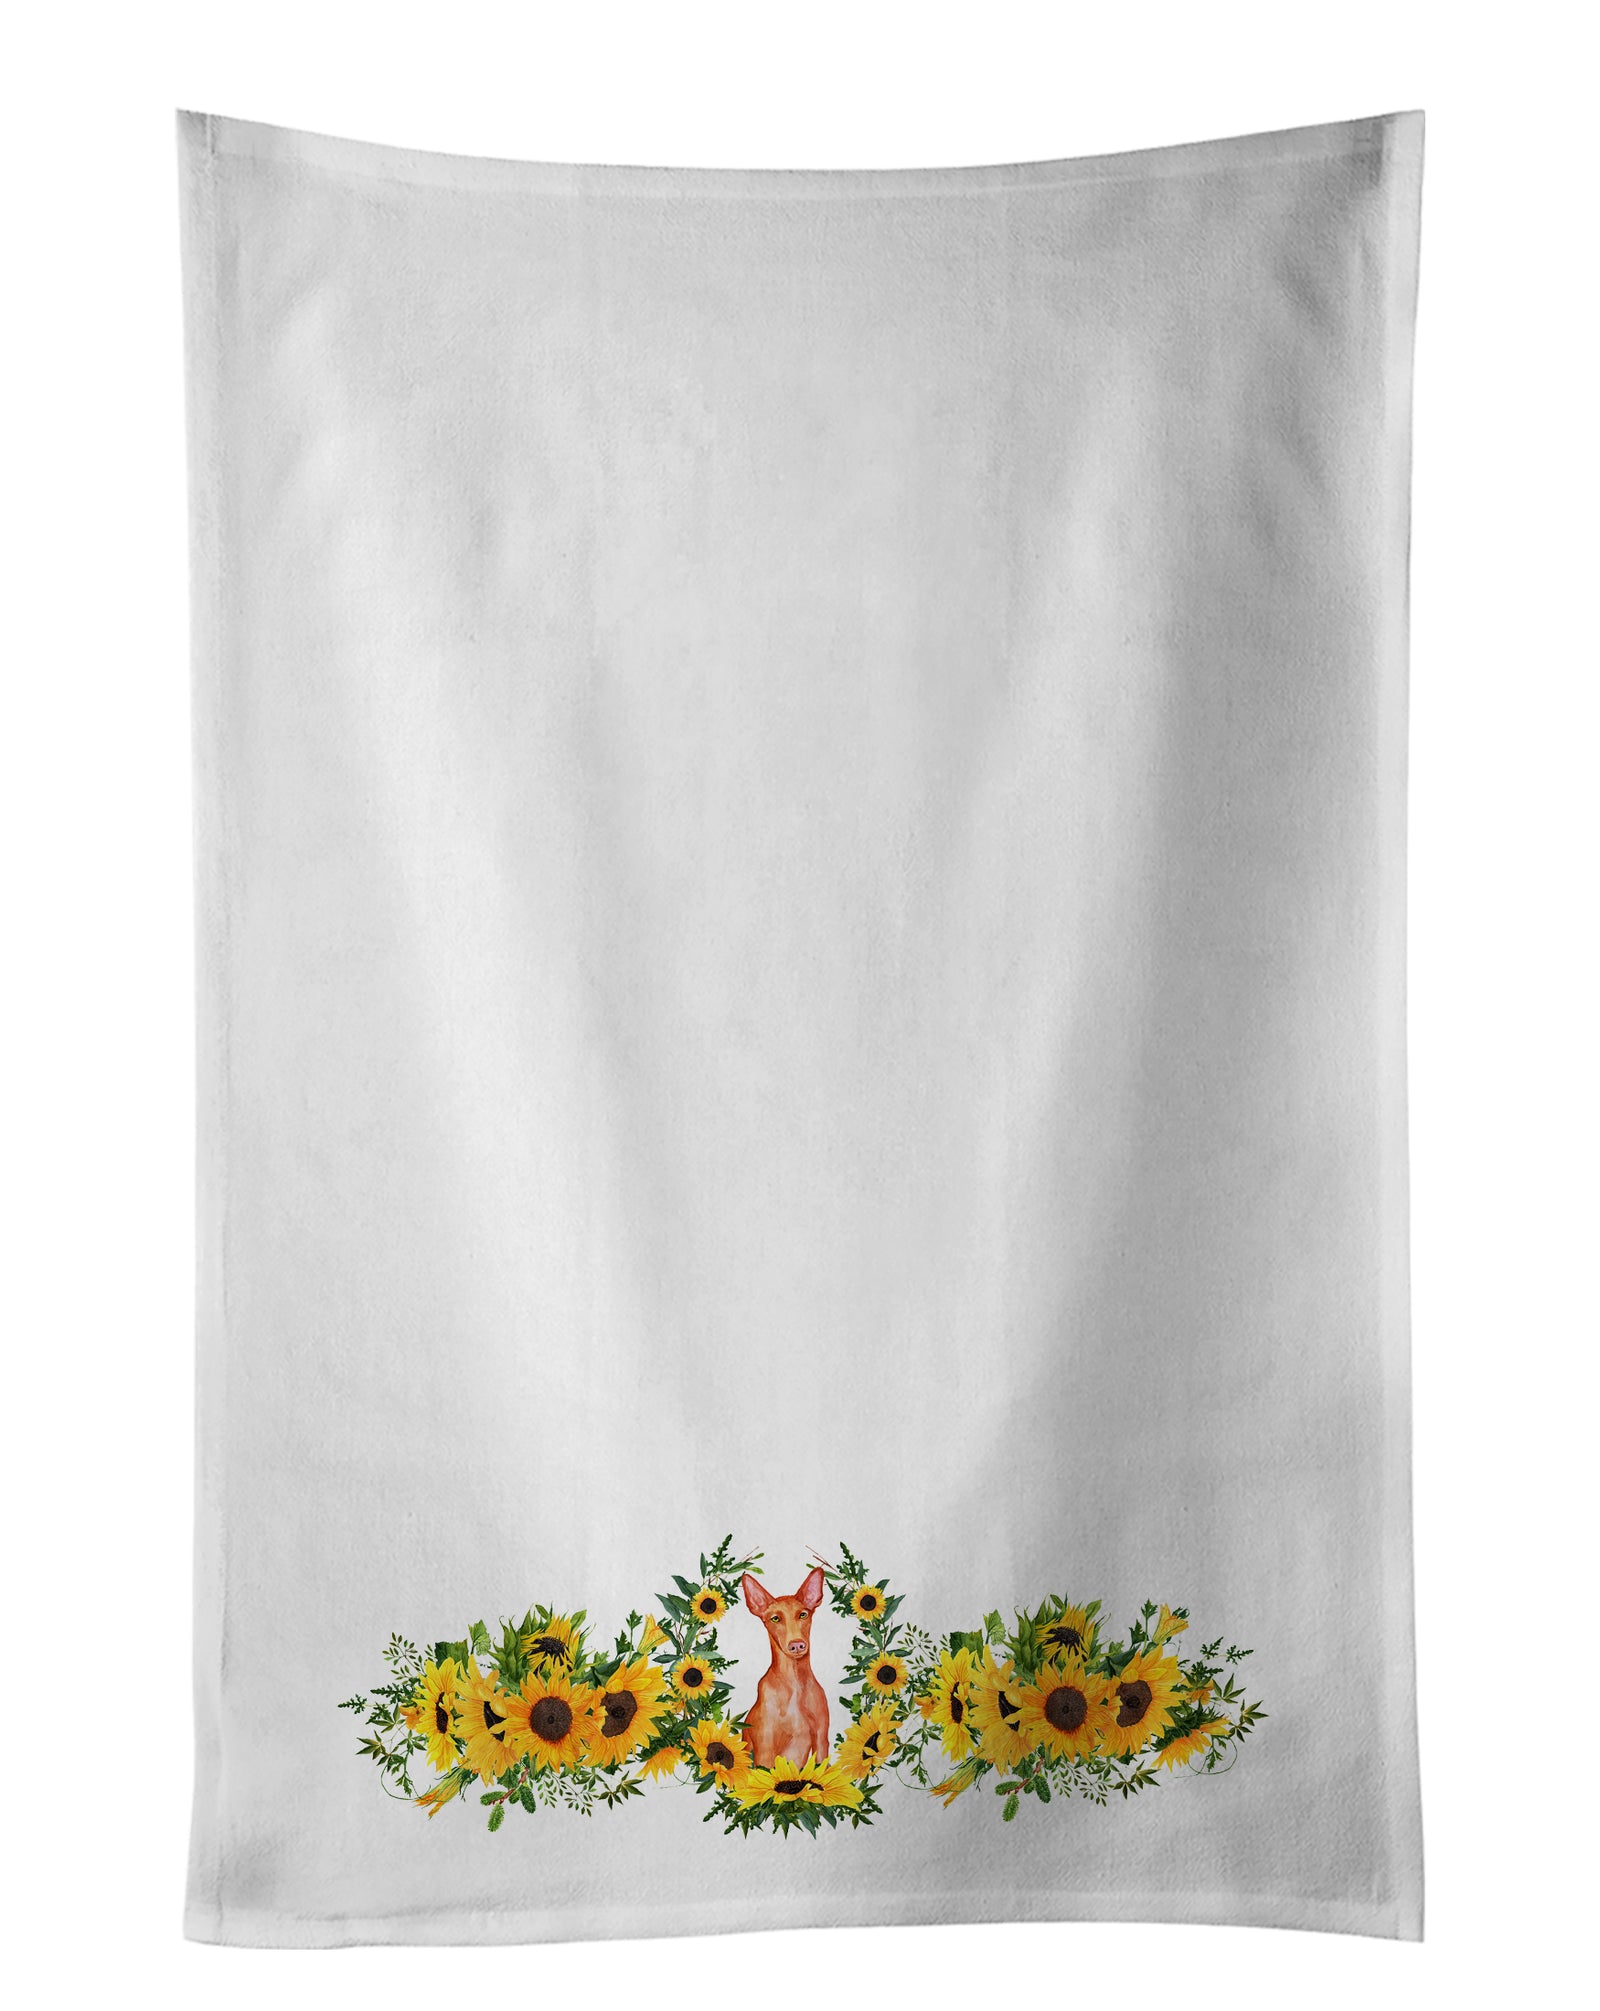 Buy this Pharaoh Hound in Sunflowers White Kitchen Towel Set of 2